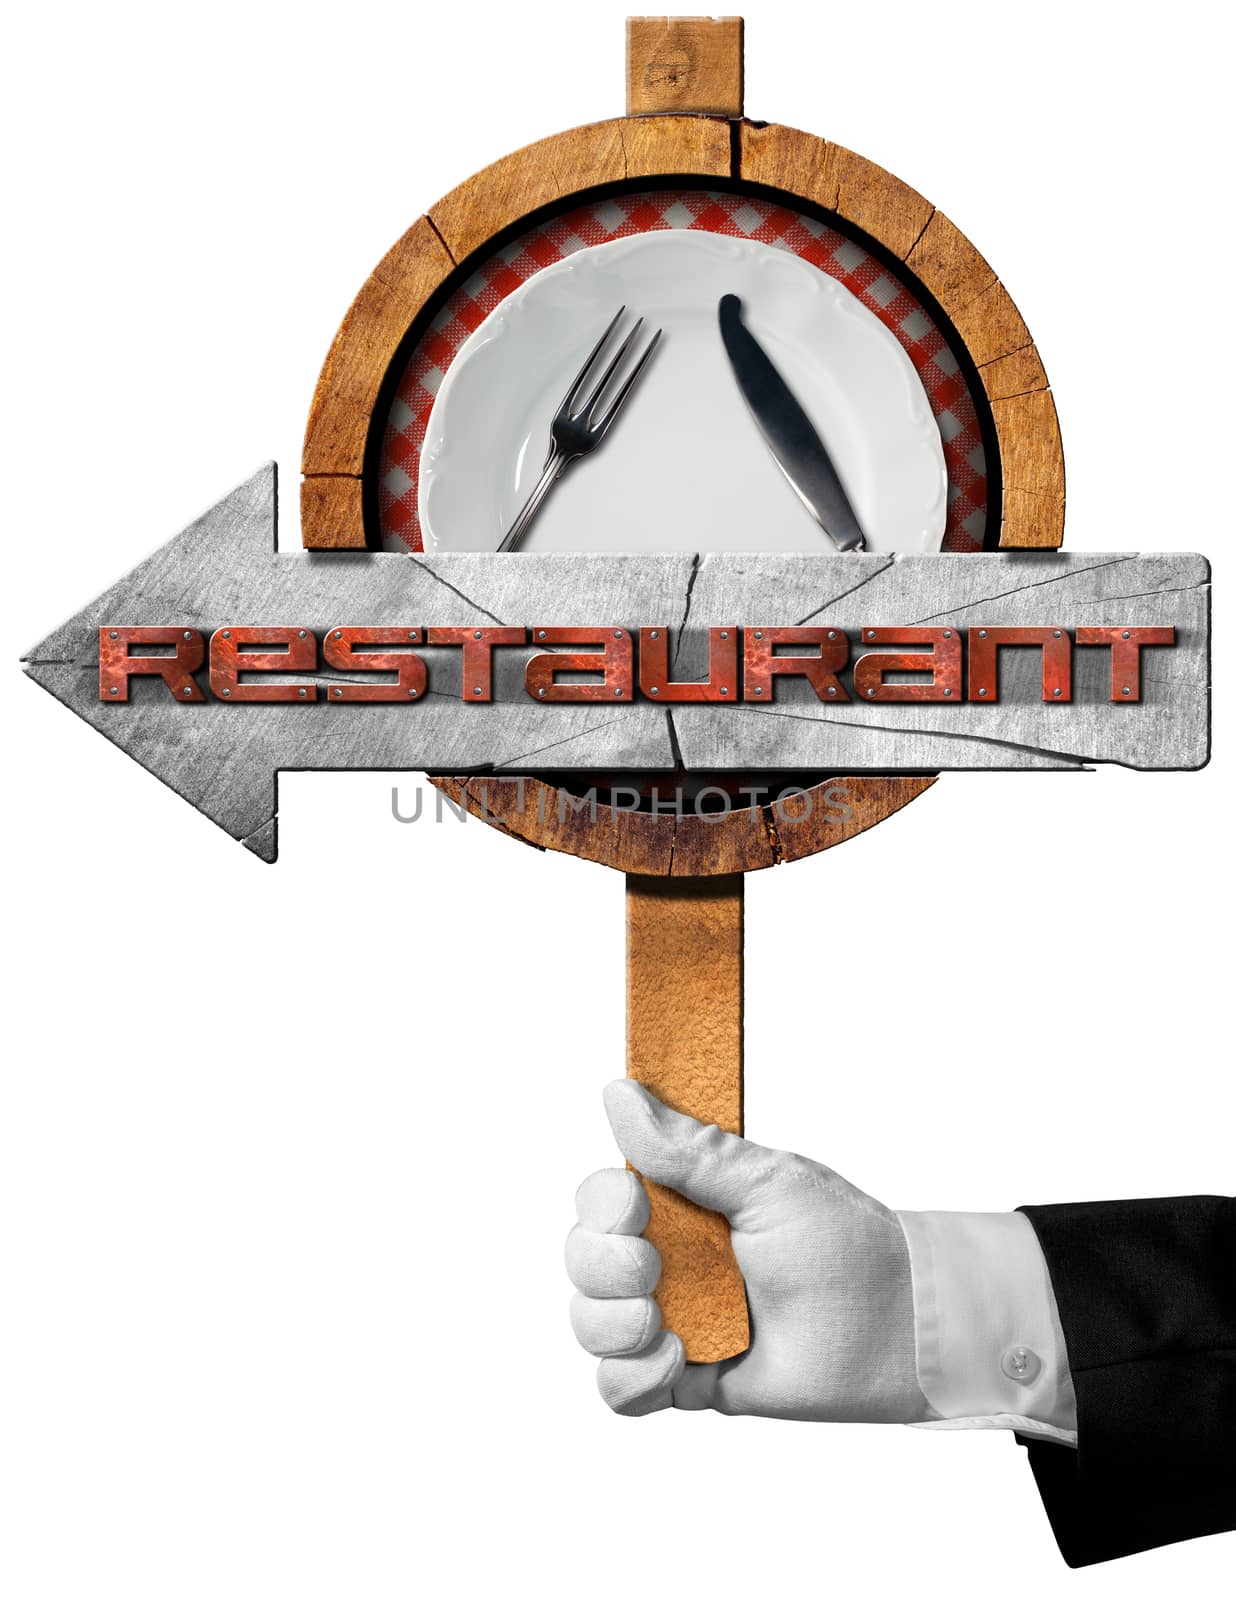 Hand of waiter with white glove holding a pole with directional sign with arrow, white plate, silver cutlery and metallic text restaurant. Isolated on white background